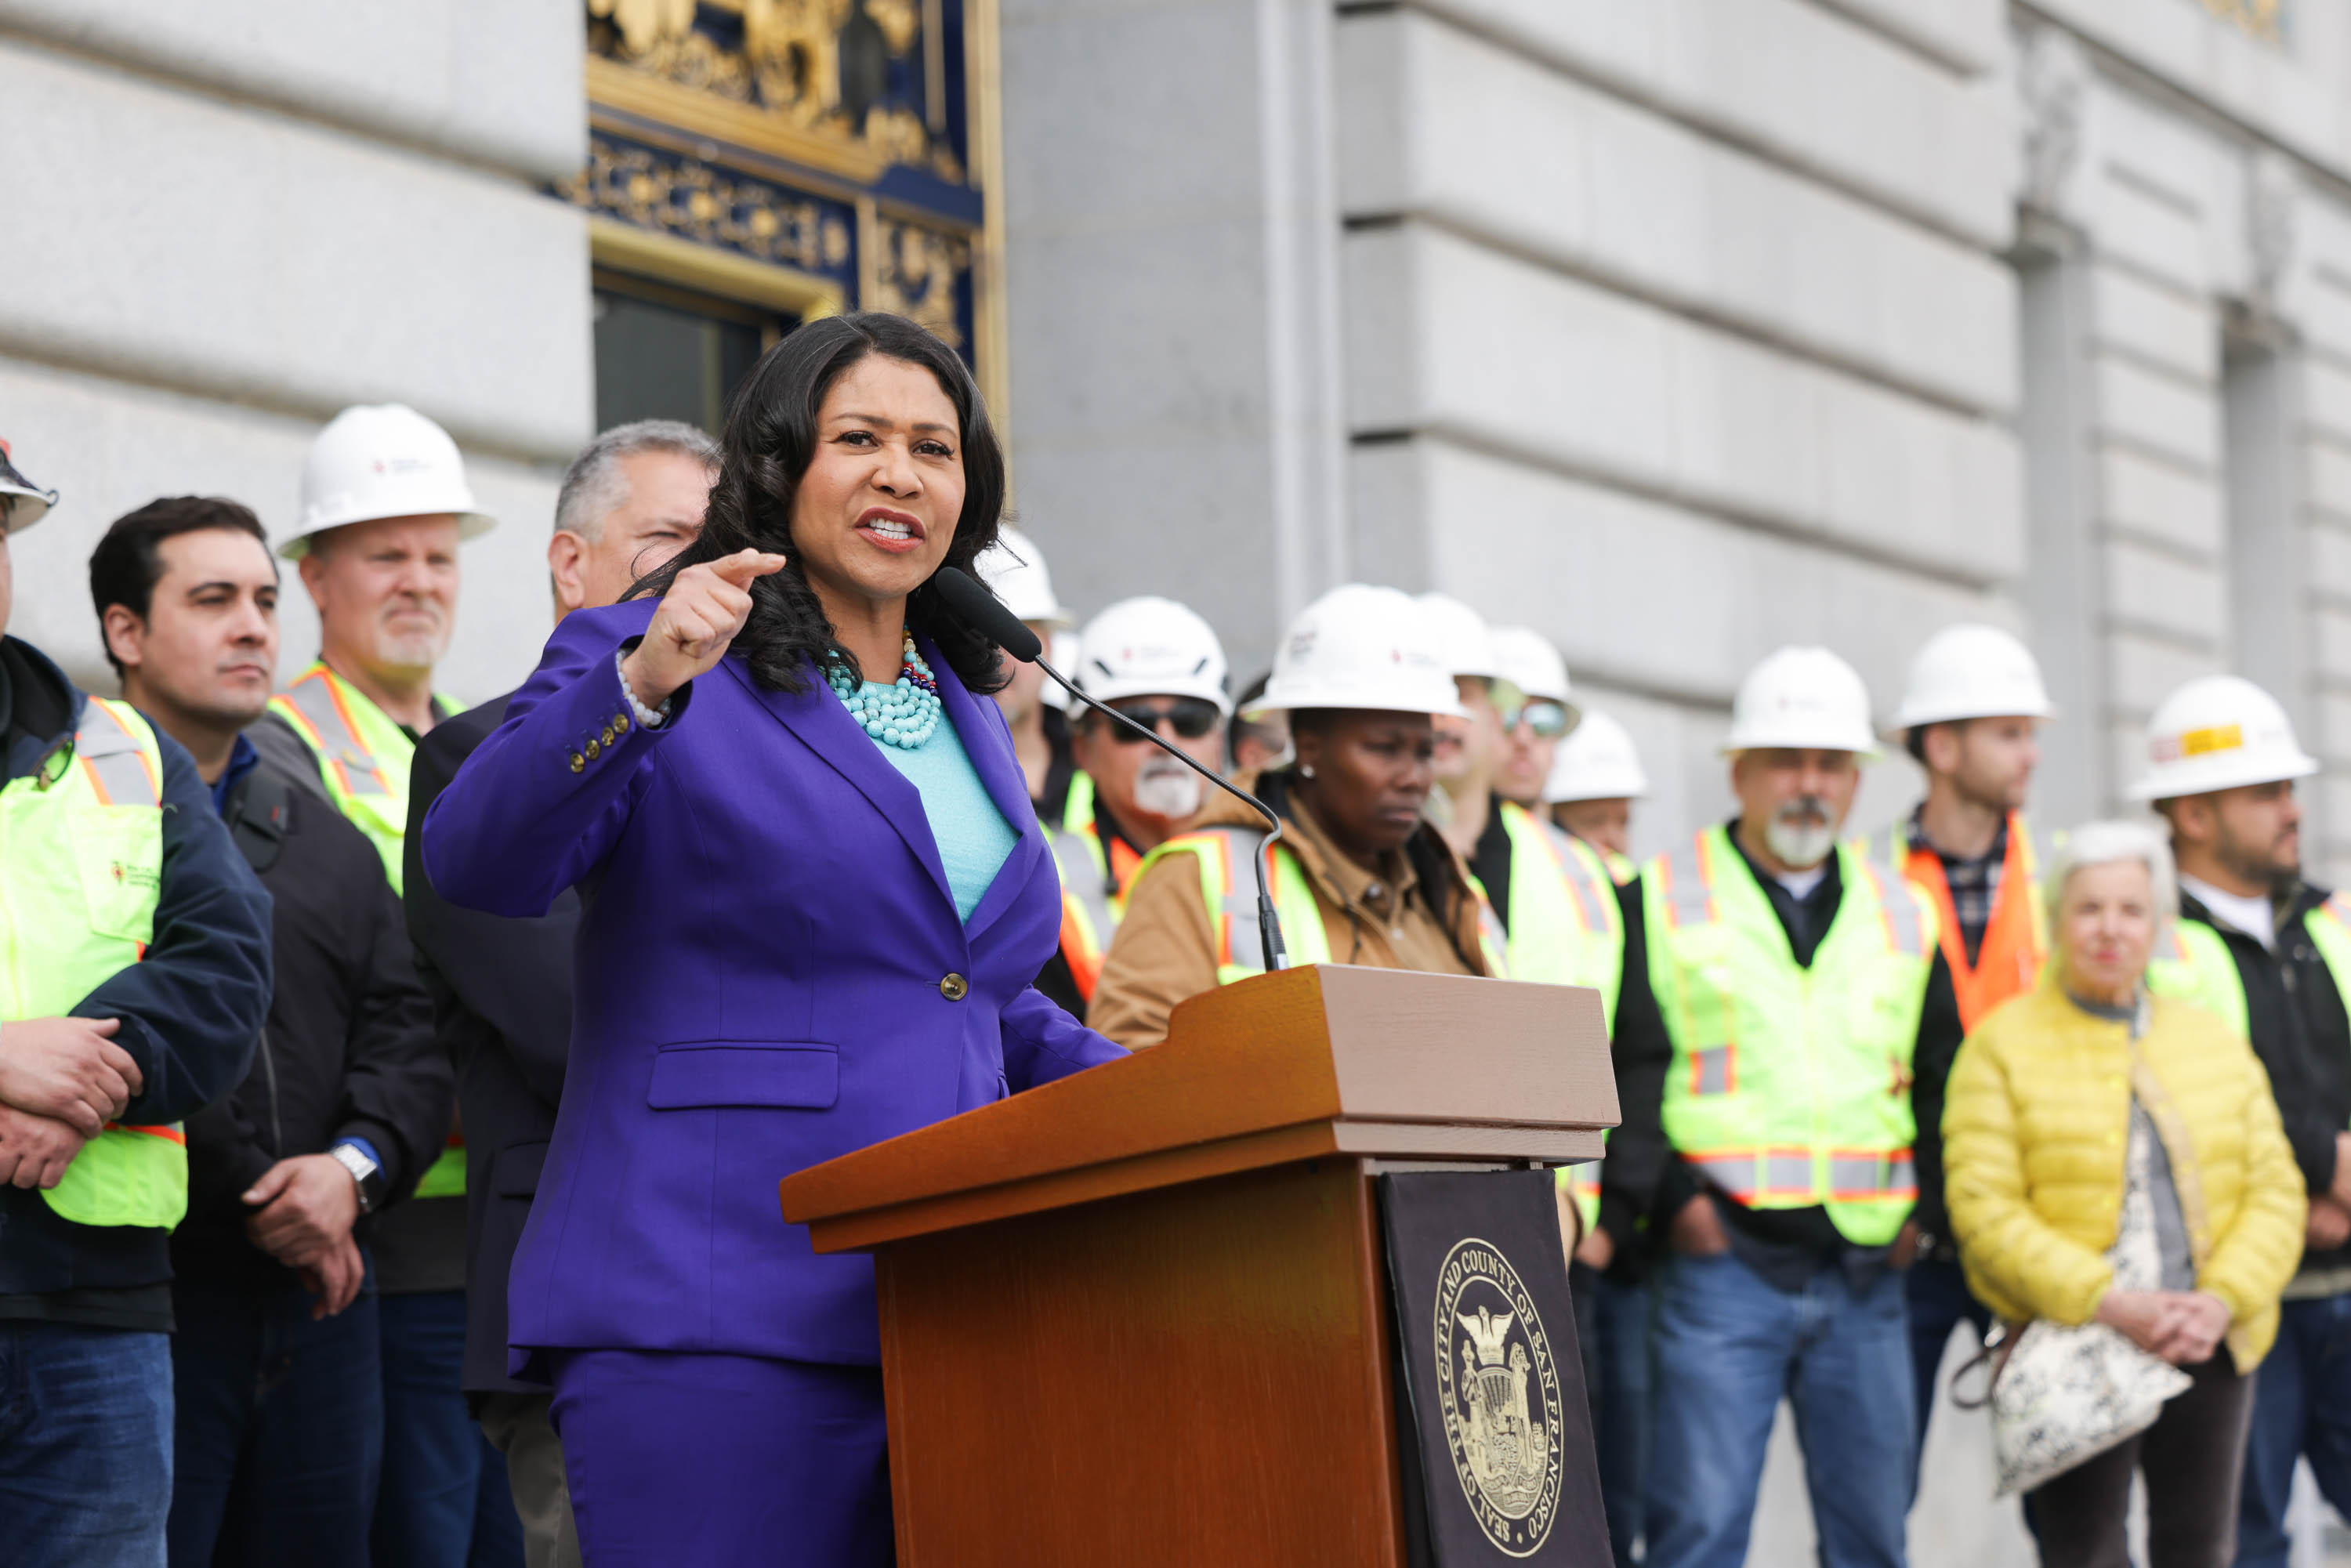 A woman speaks at a podium with a group of people, some in safety vests and hard hats, behind her.